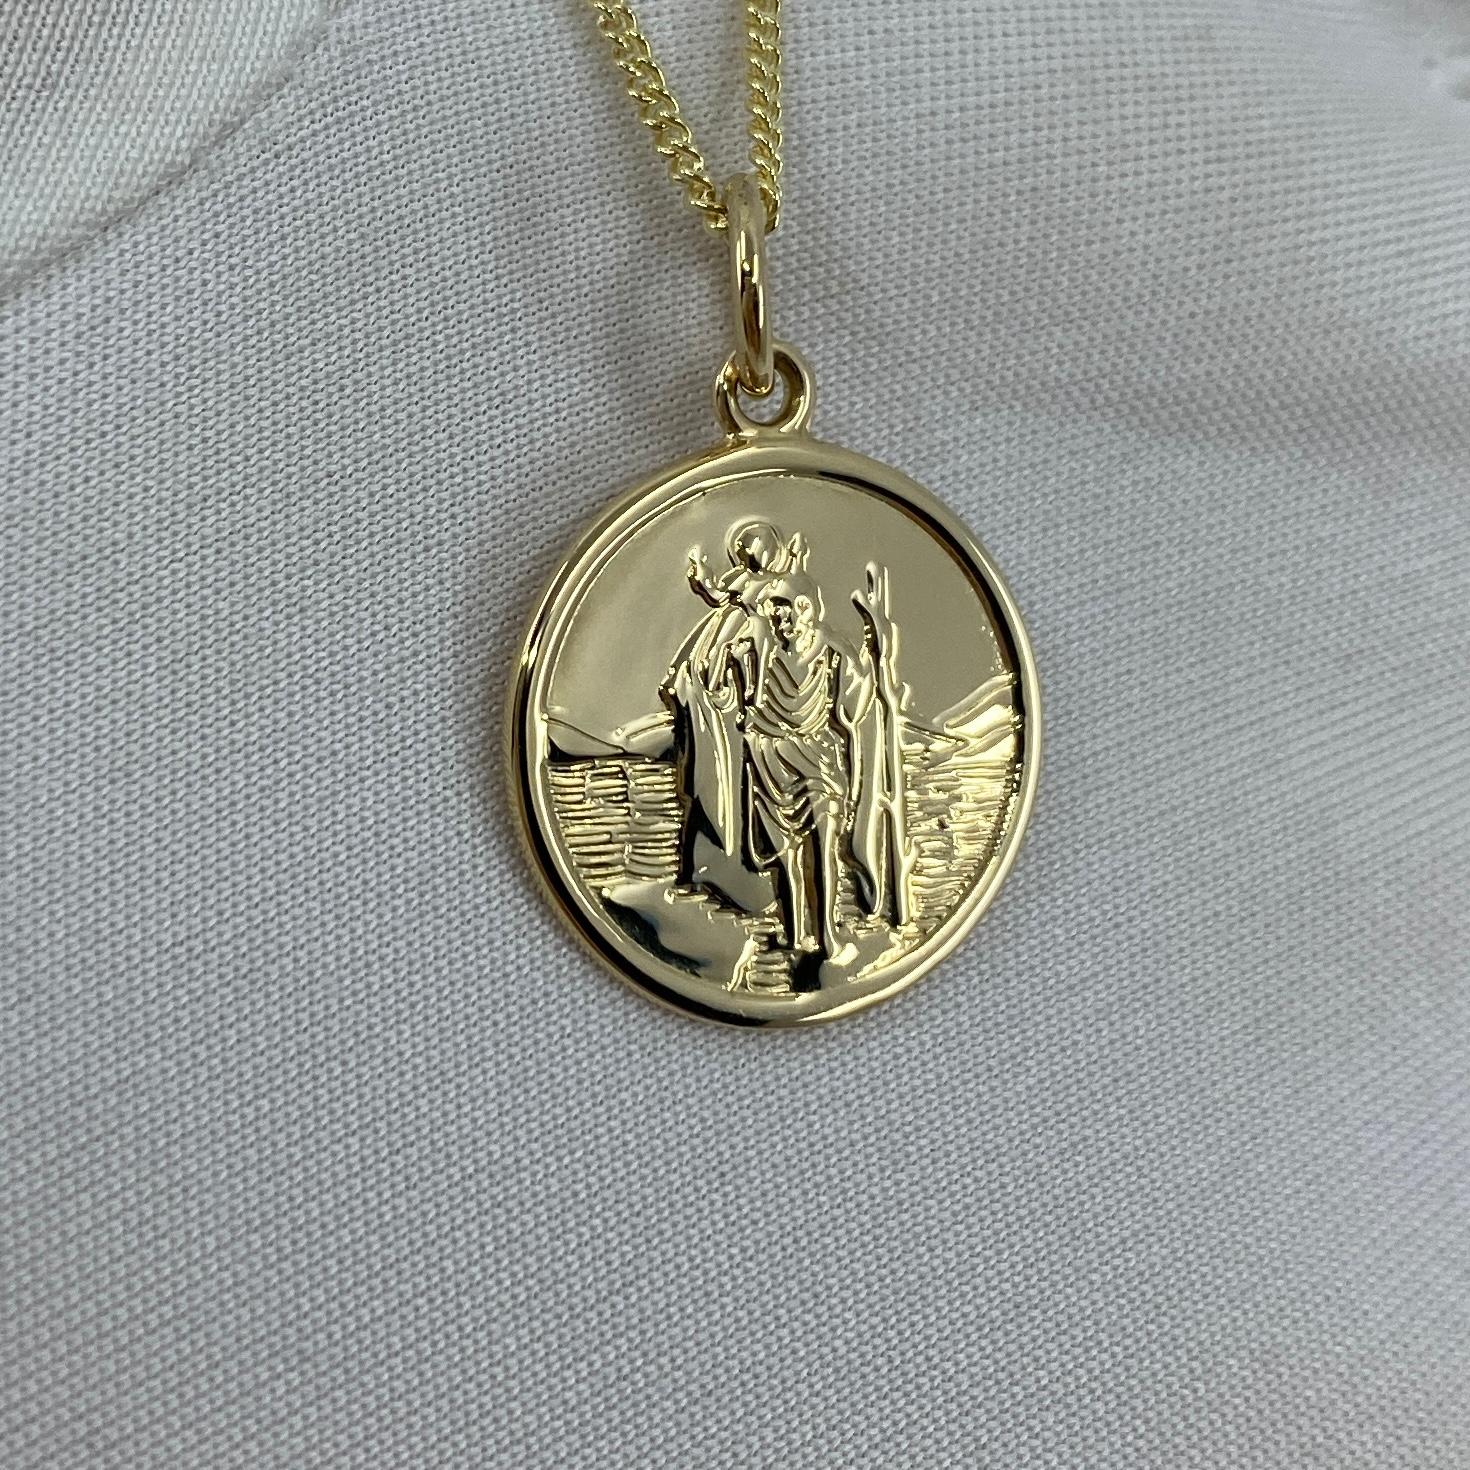 9k Yellow Gold Round St. Christopher Pendant Necklace.

Beautiful 16mm round St. Christopher pendant weighing 1.8g hanging on an 18' (45cm) curb chain.

The pendant has full UK hallmarks with the reverse blank allowing for engraving.

Brand new and